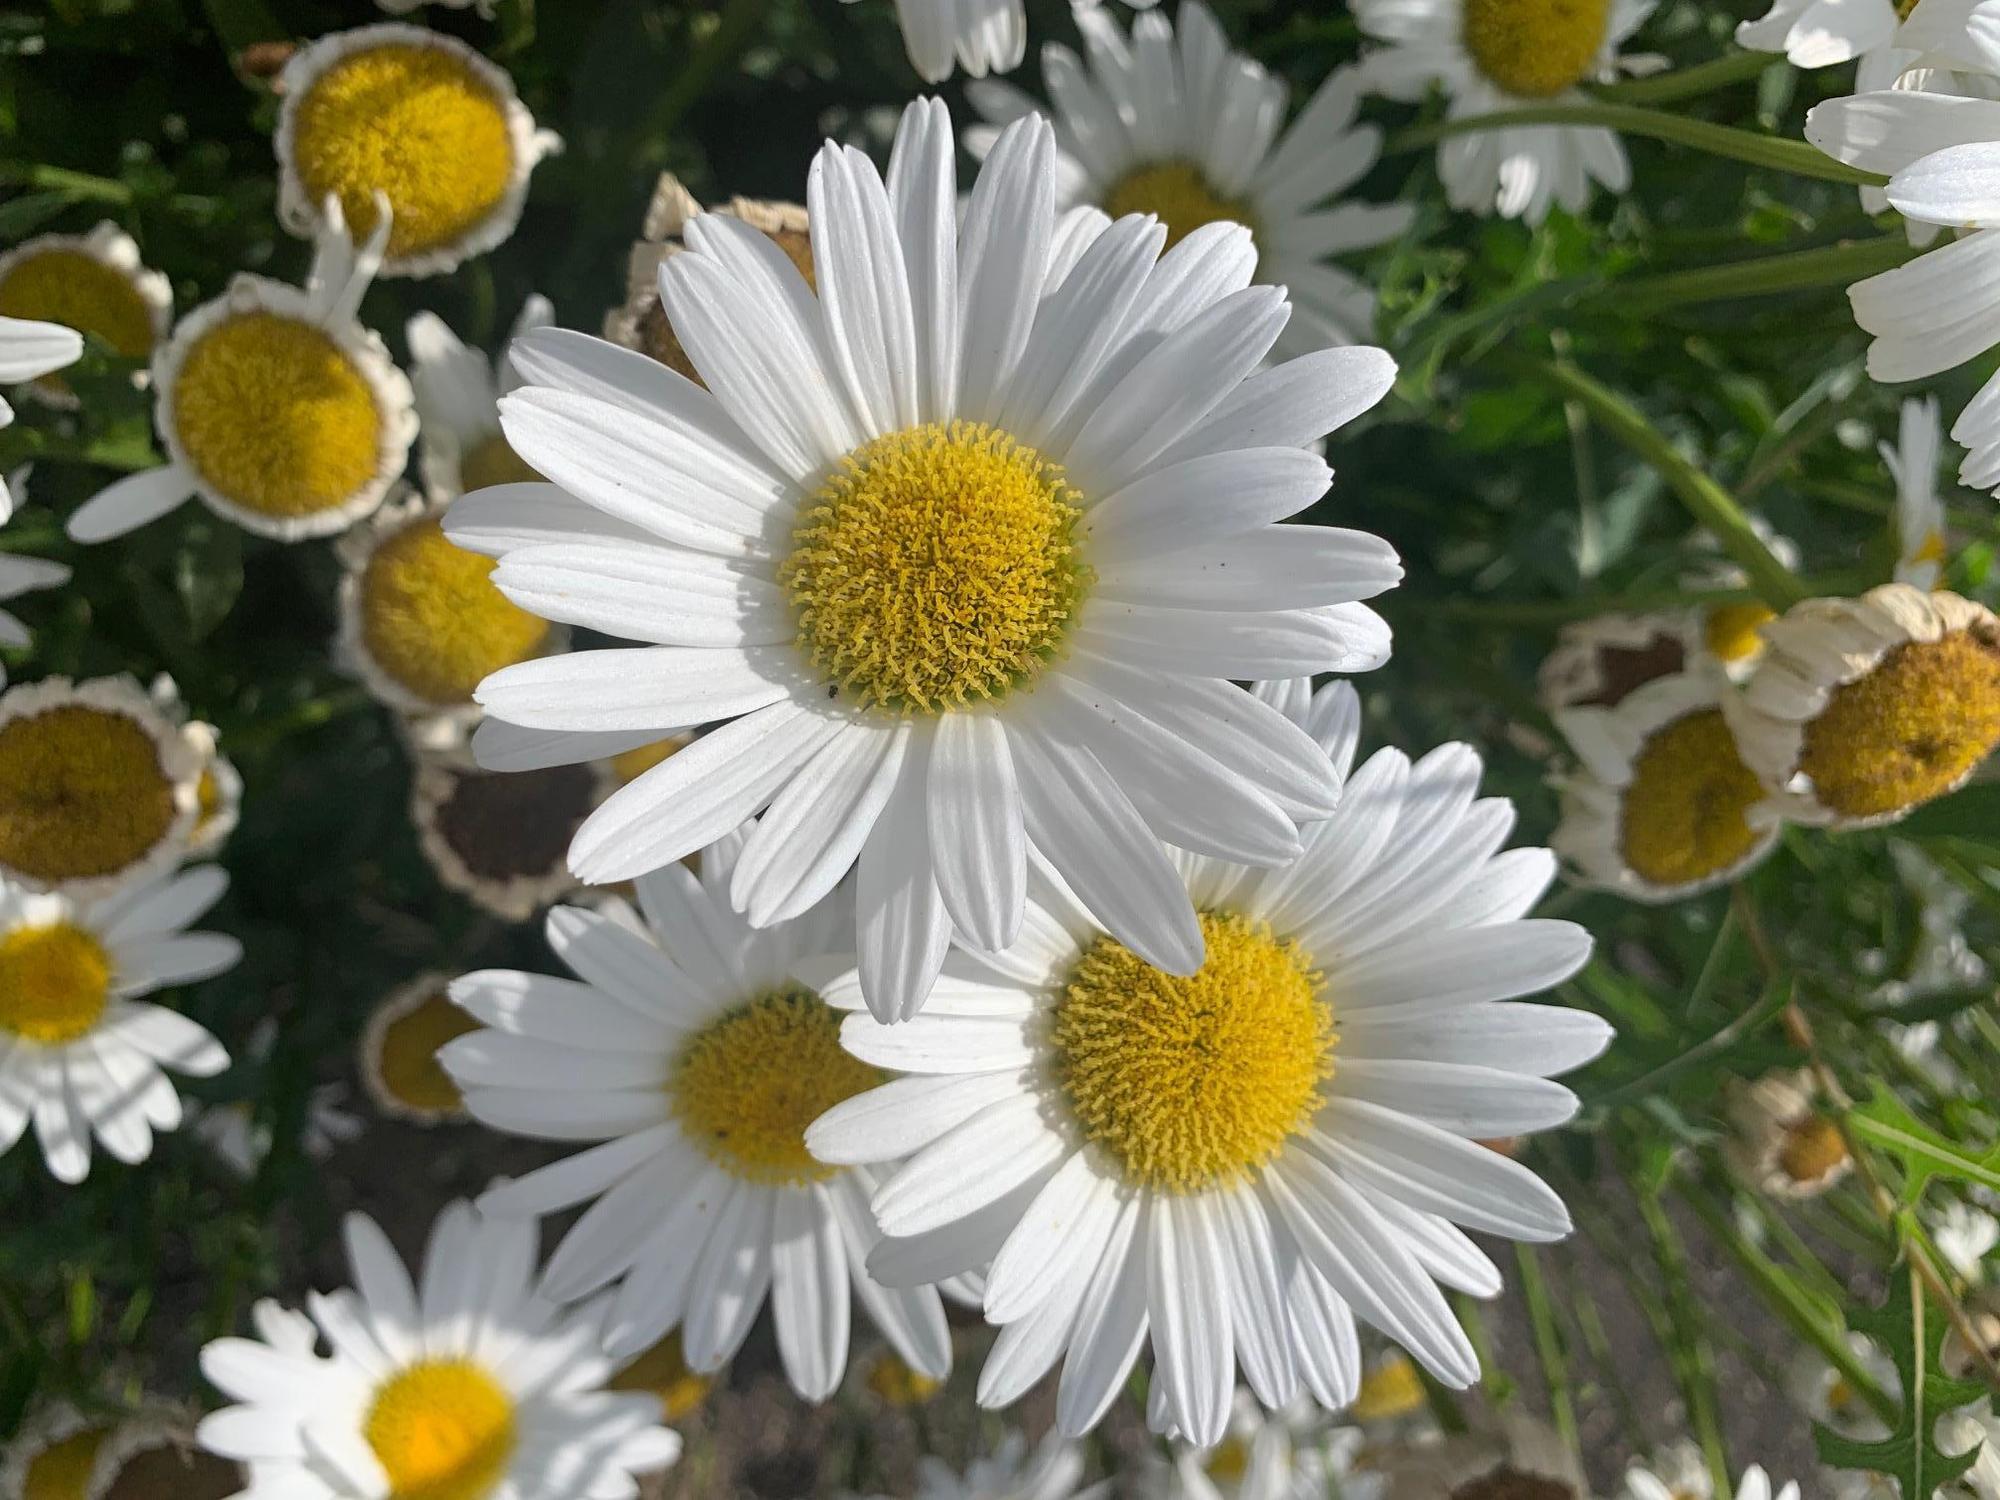 Shasta daisy flowers, white with yellow centers